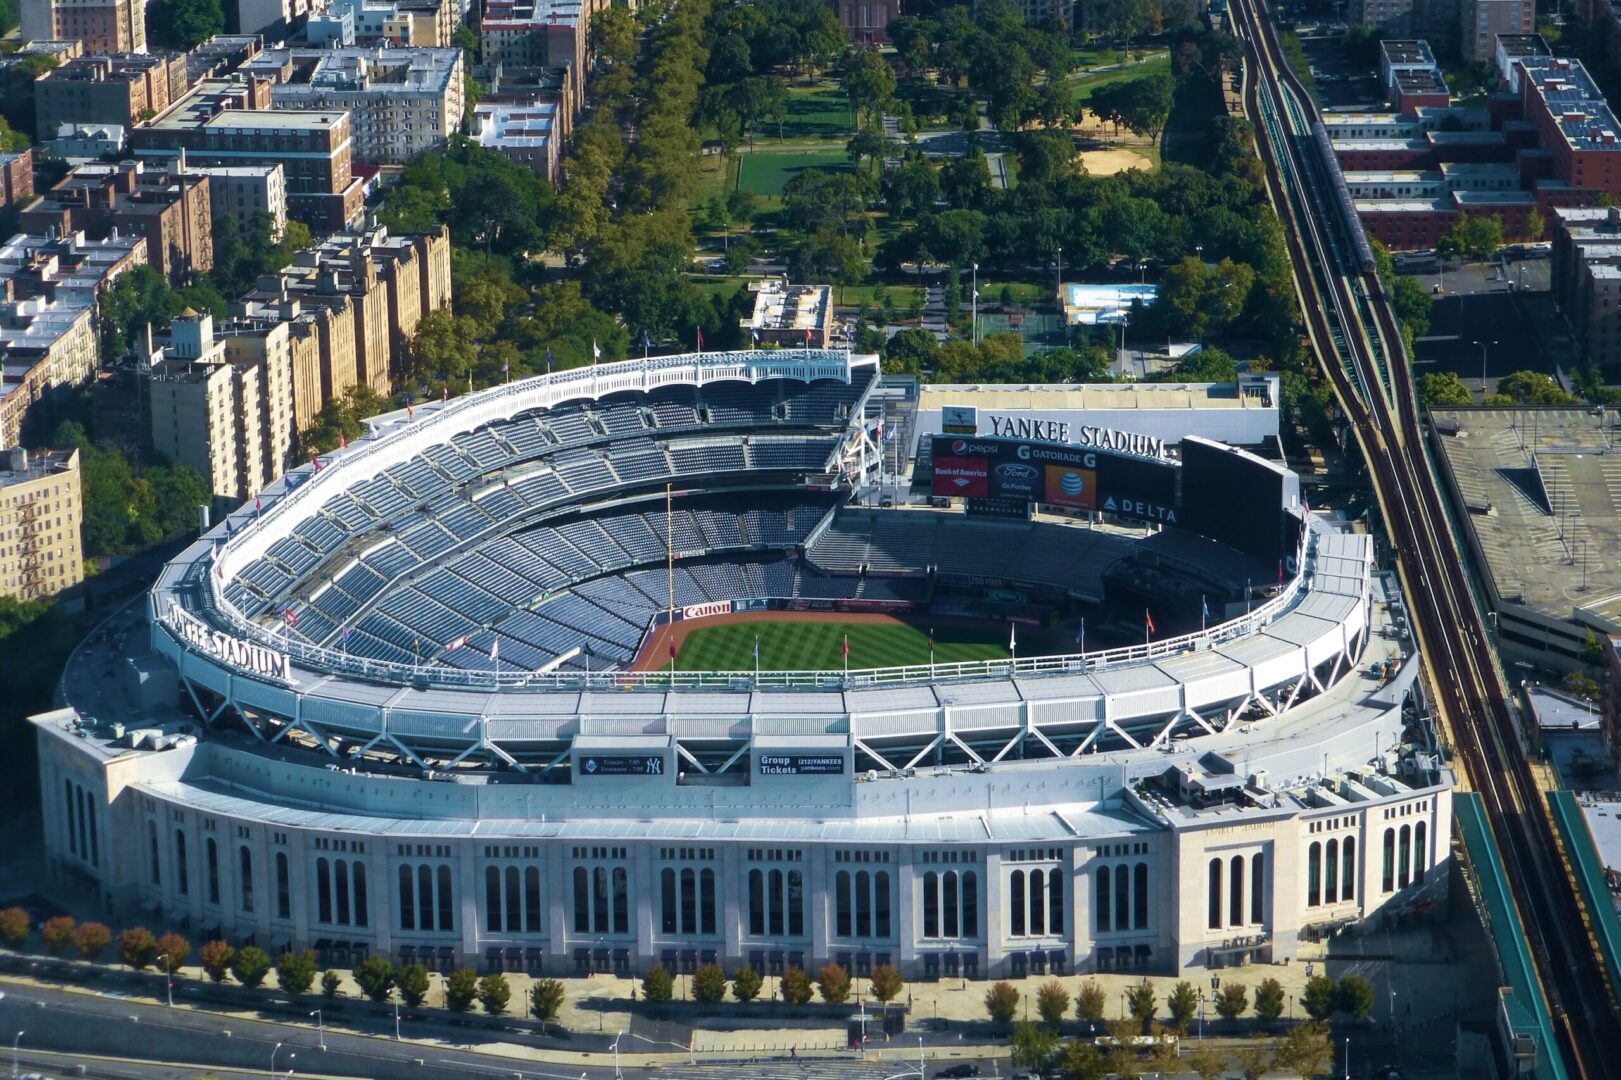 Aerial view of yankee stadium on a clear day.